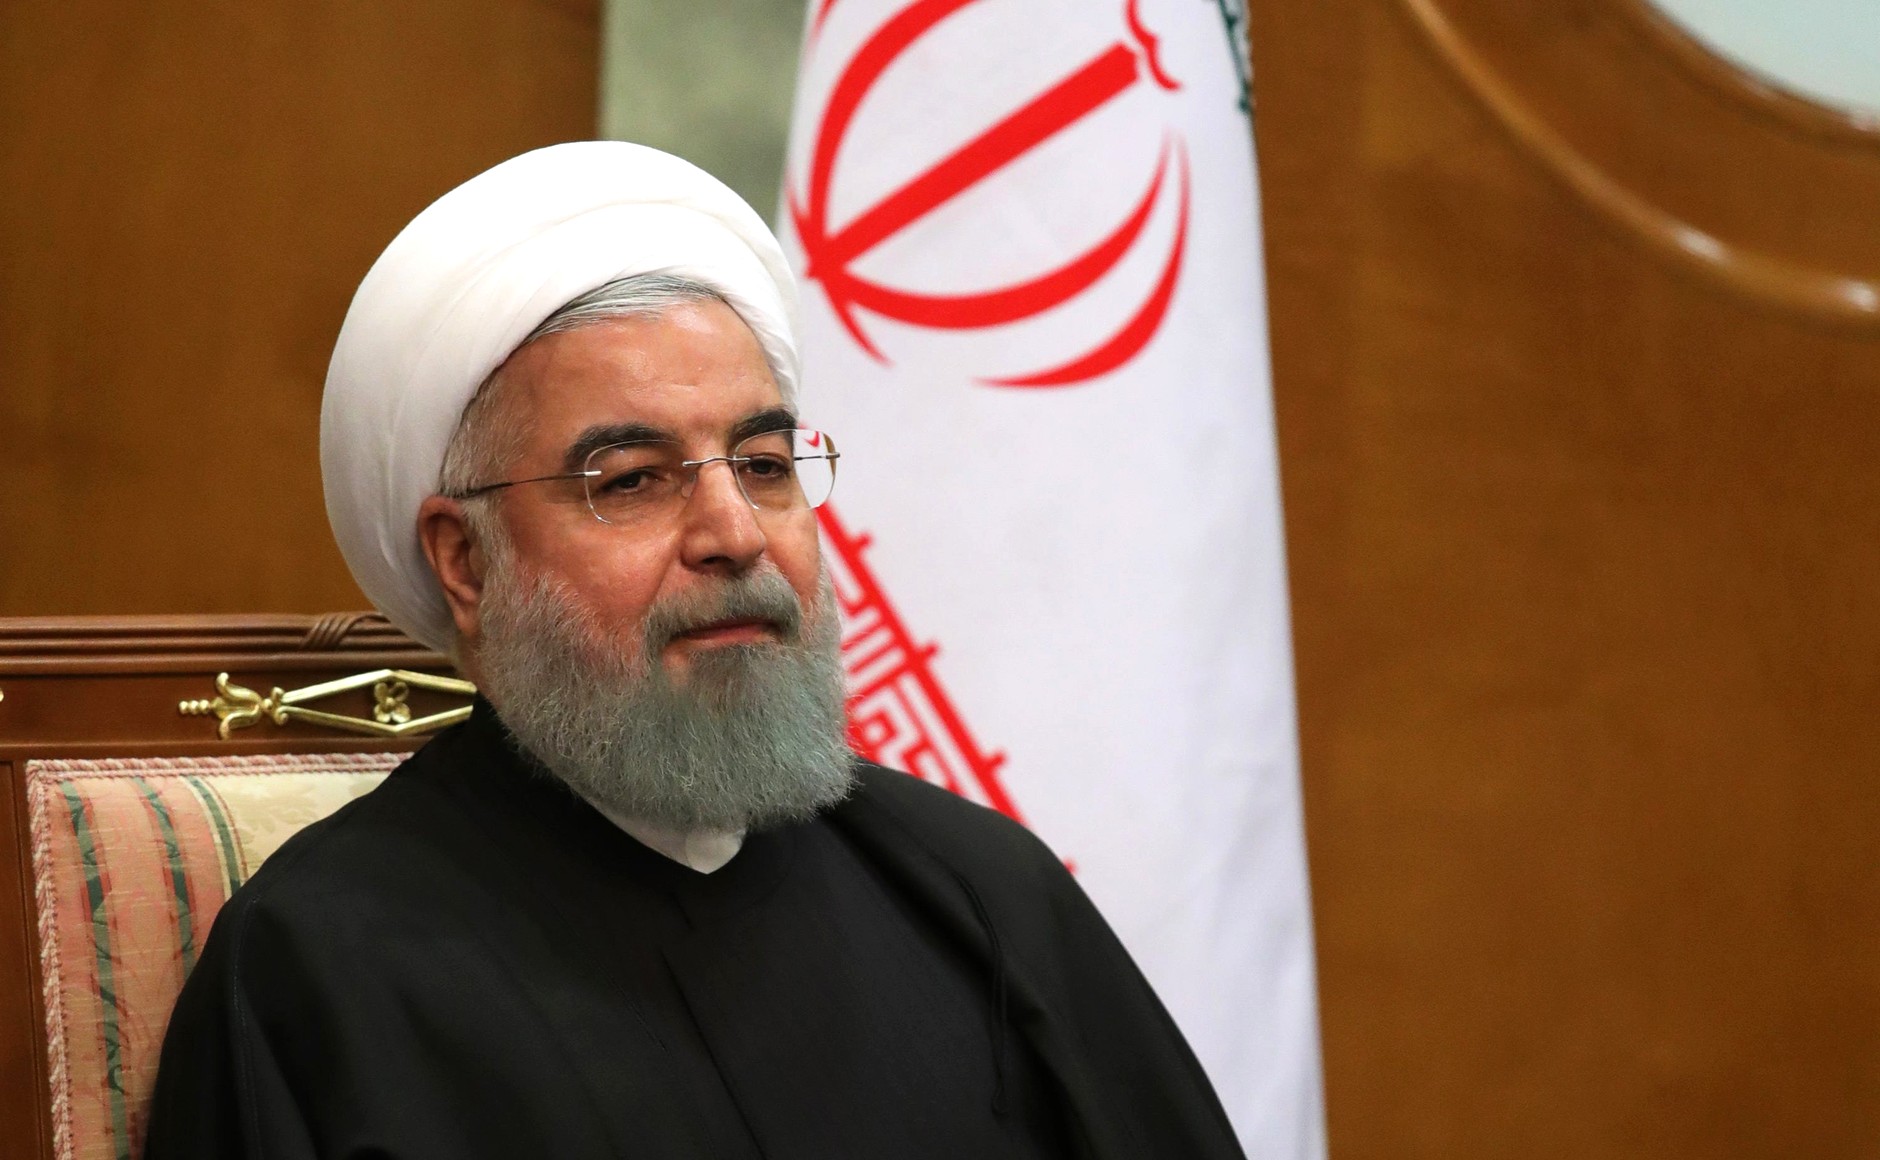 President Of Iran: The White House Is ‘Afflicted By Mental Retardation’